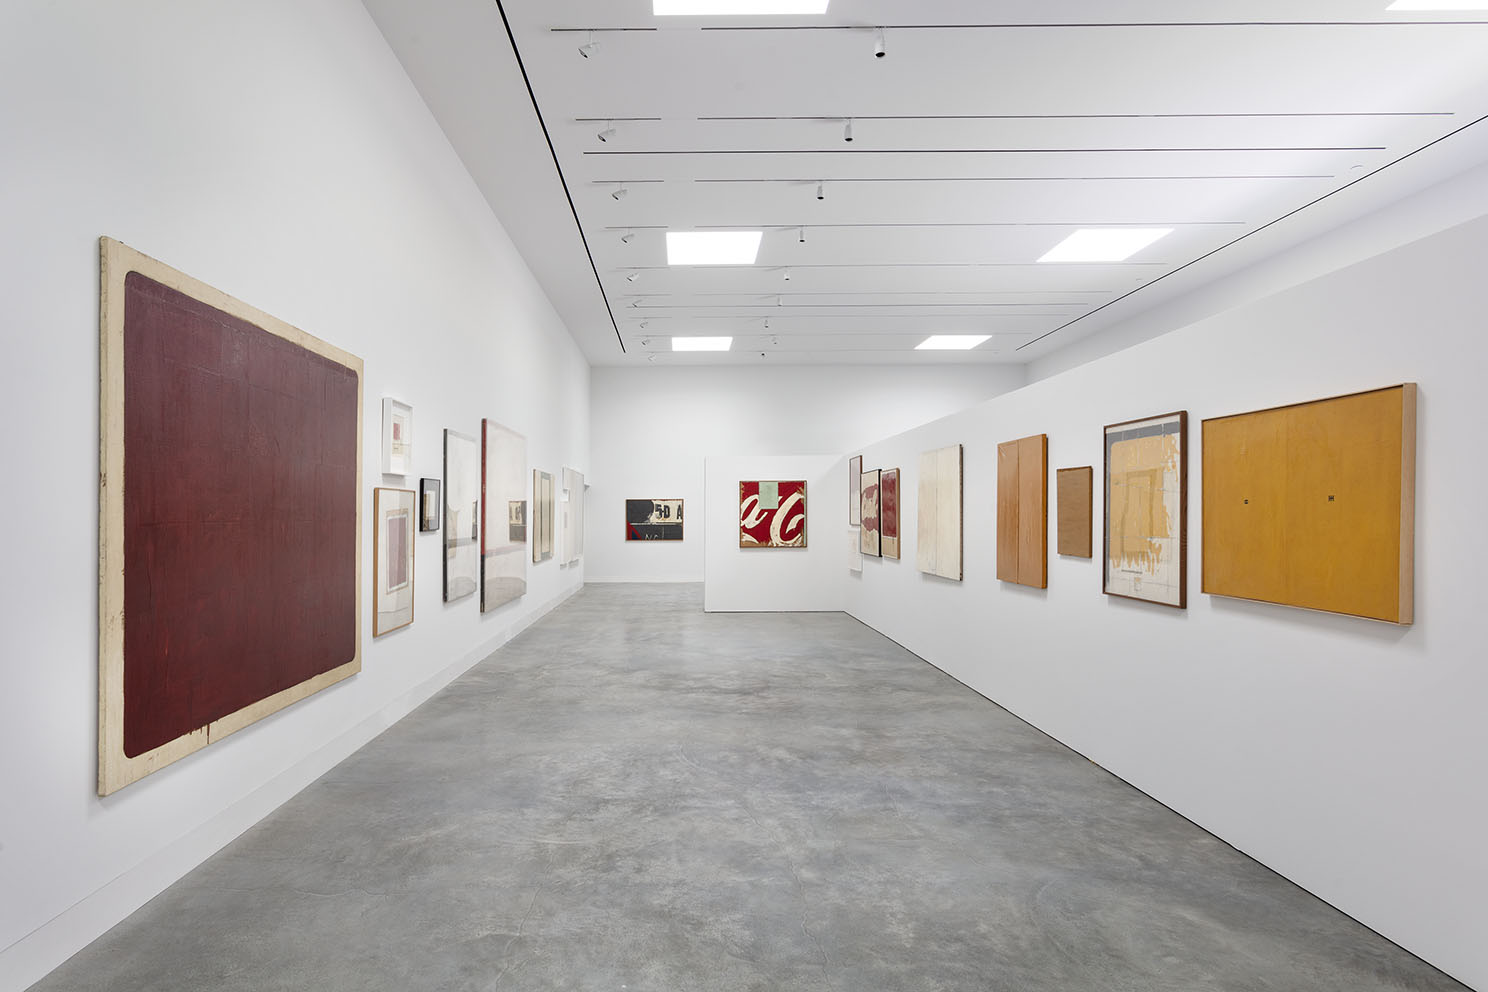 Installation view of Mario Schifano: The Rise of the ‘60s, curated by Alberto Salvadori, at the Robert Olnick Pavilion at Magazzino Italian Art, Cold Spring, NY. Photo by Marco Anelli and Tommaso Sacconi. Courtesy Magazzino Italian Art.